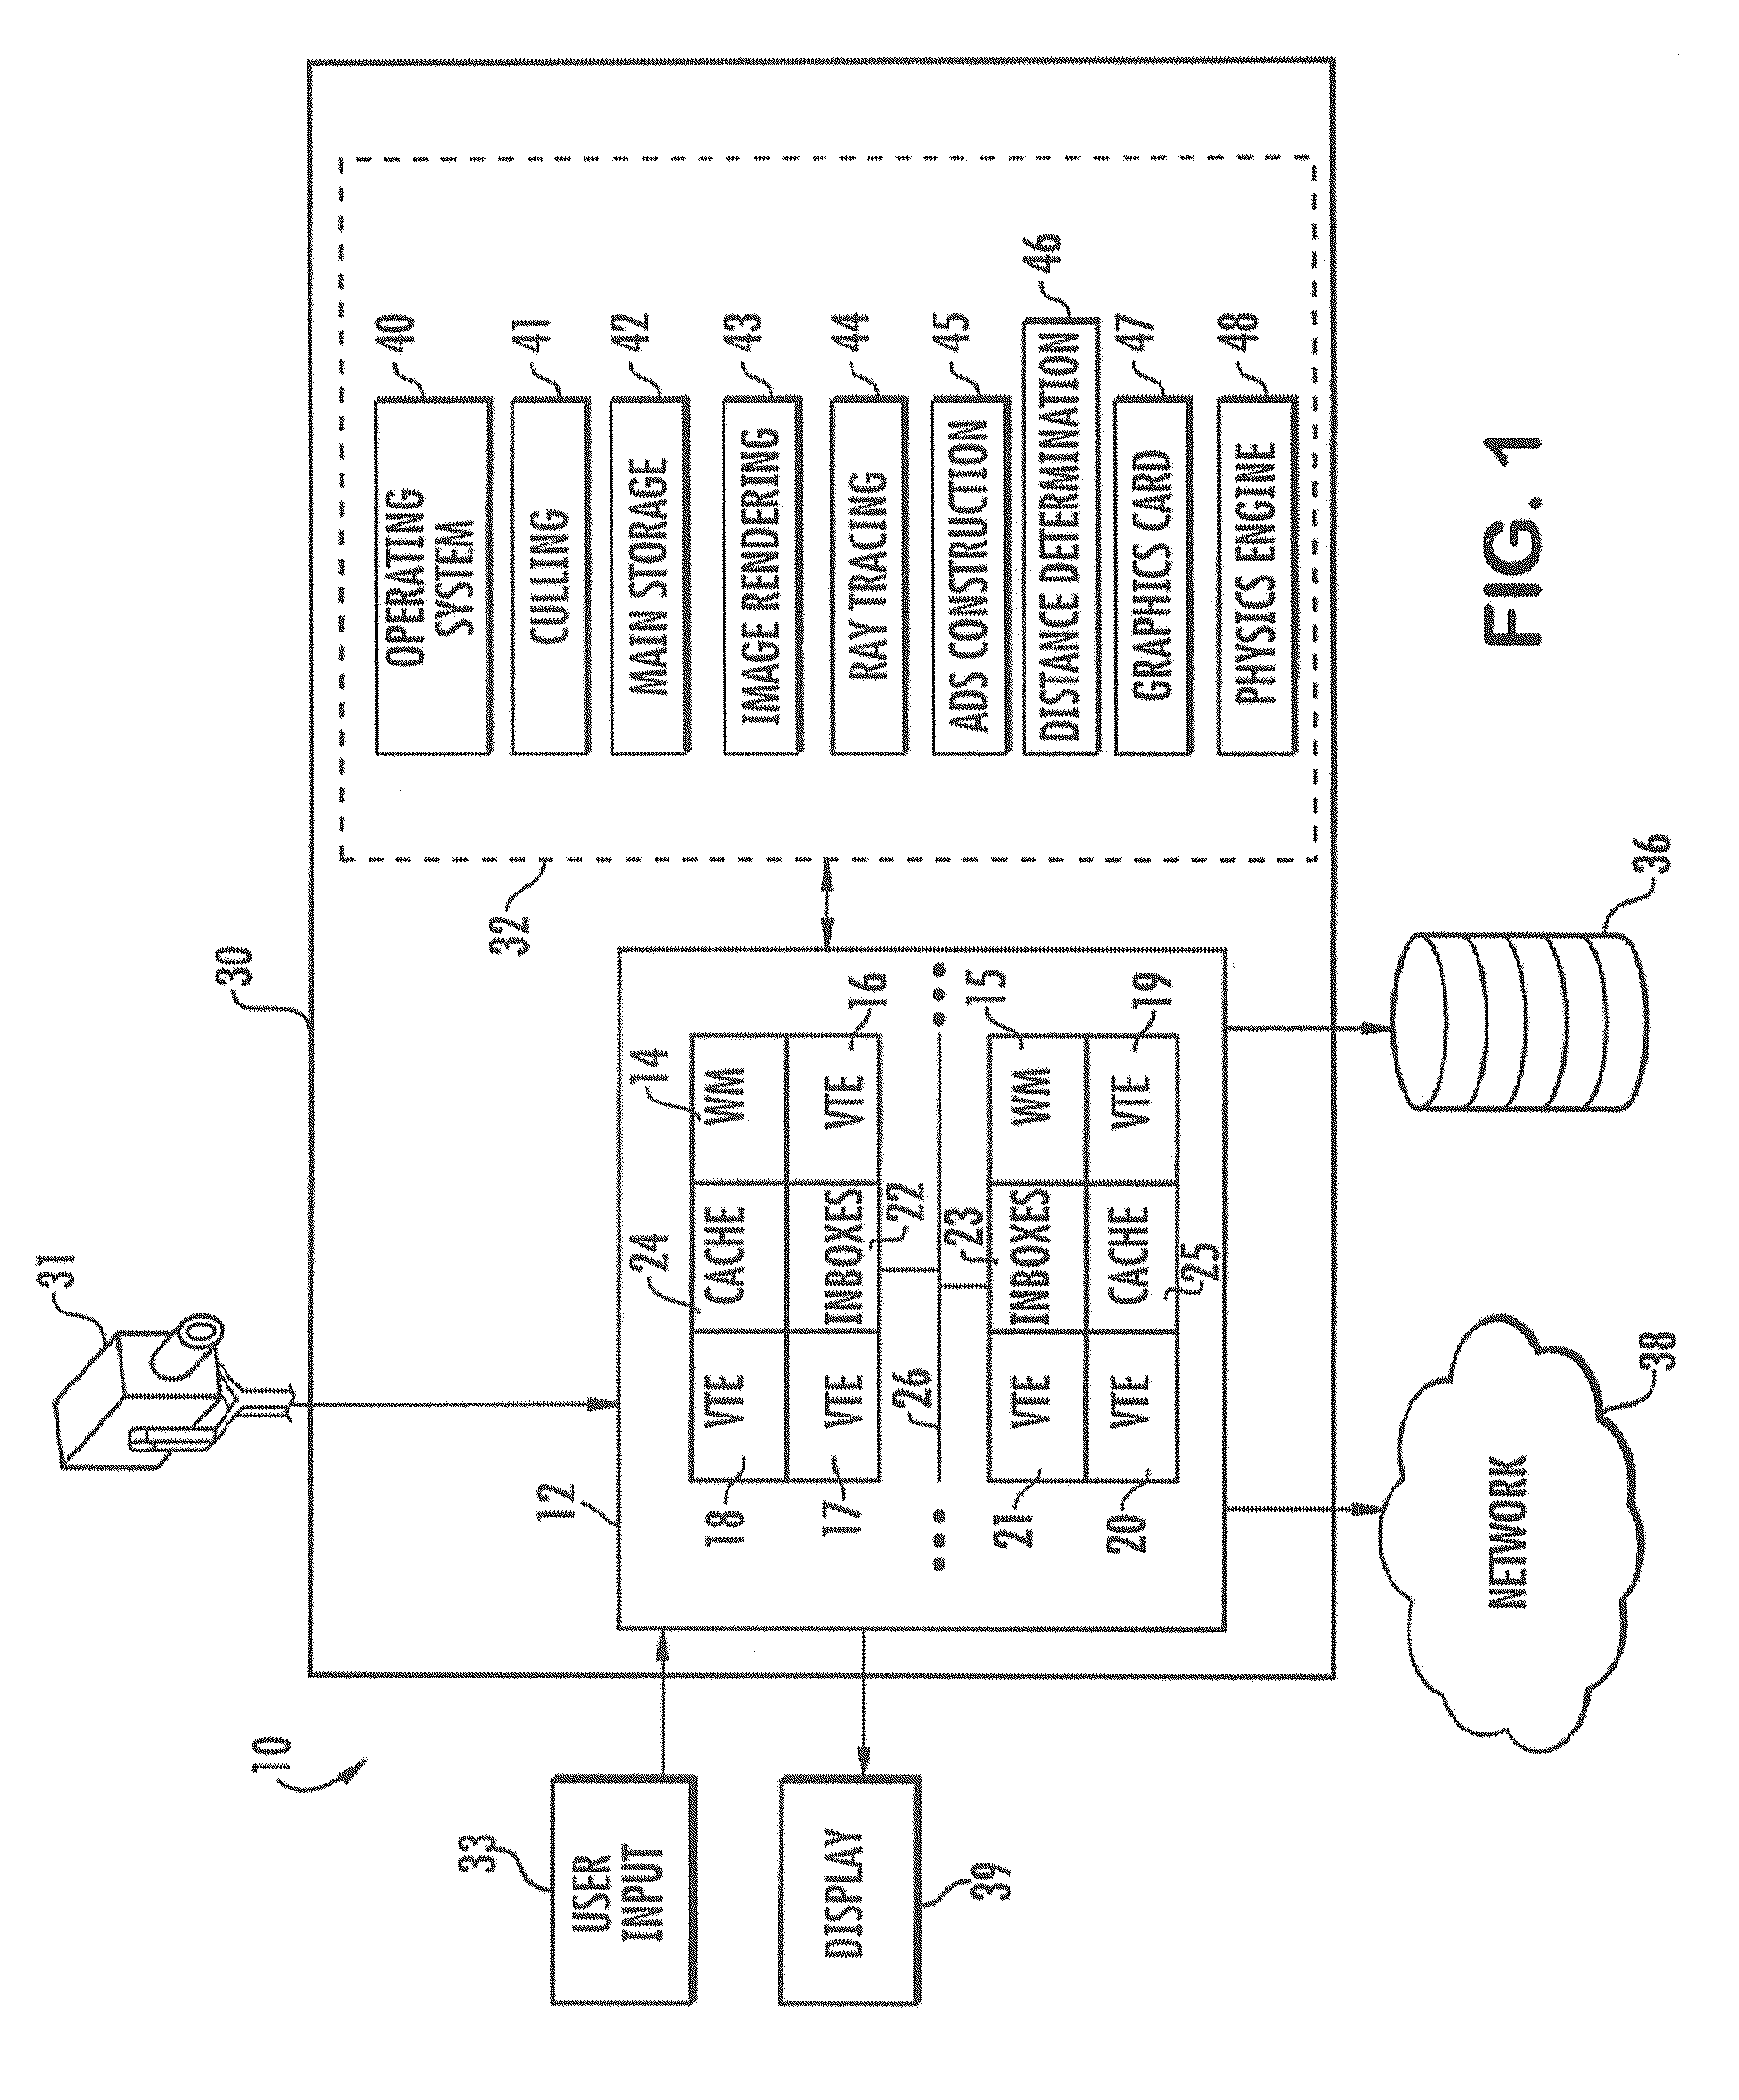 Parallelized streaming accelerated data structure generation